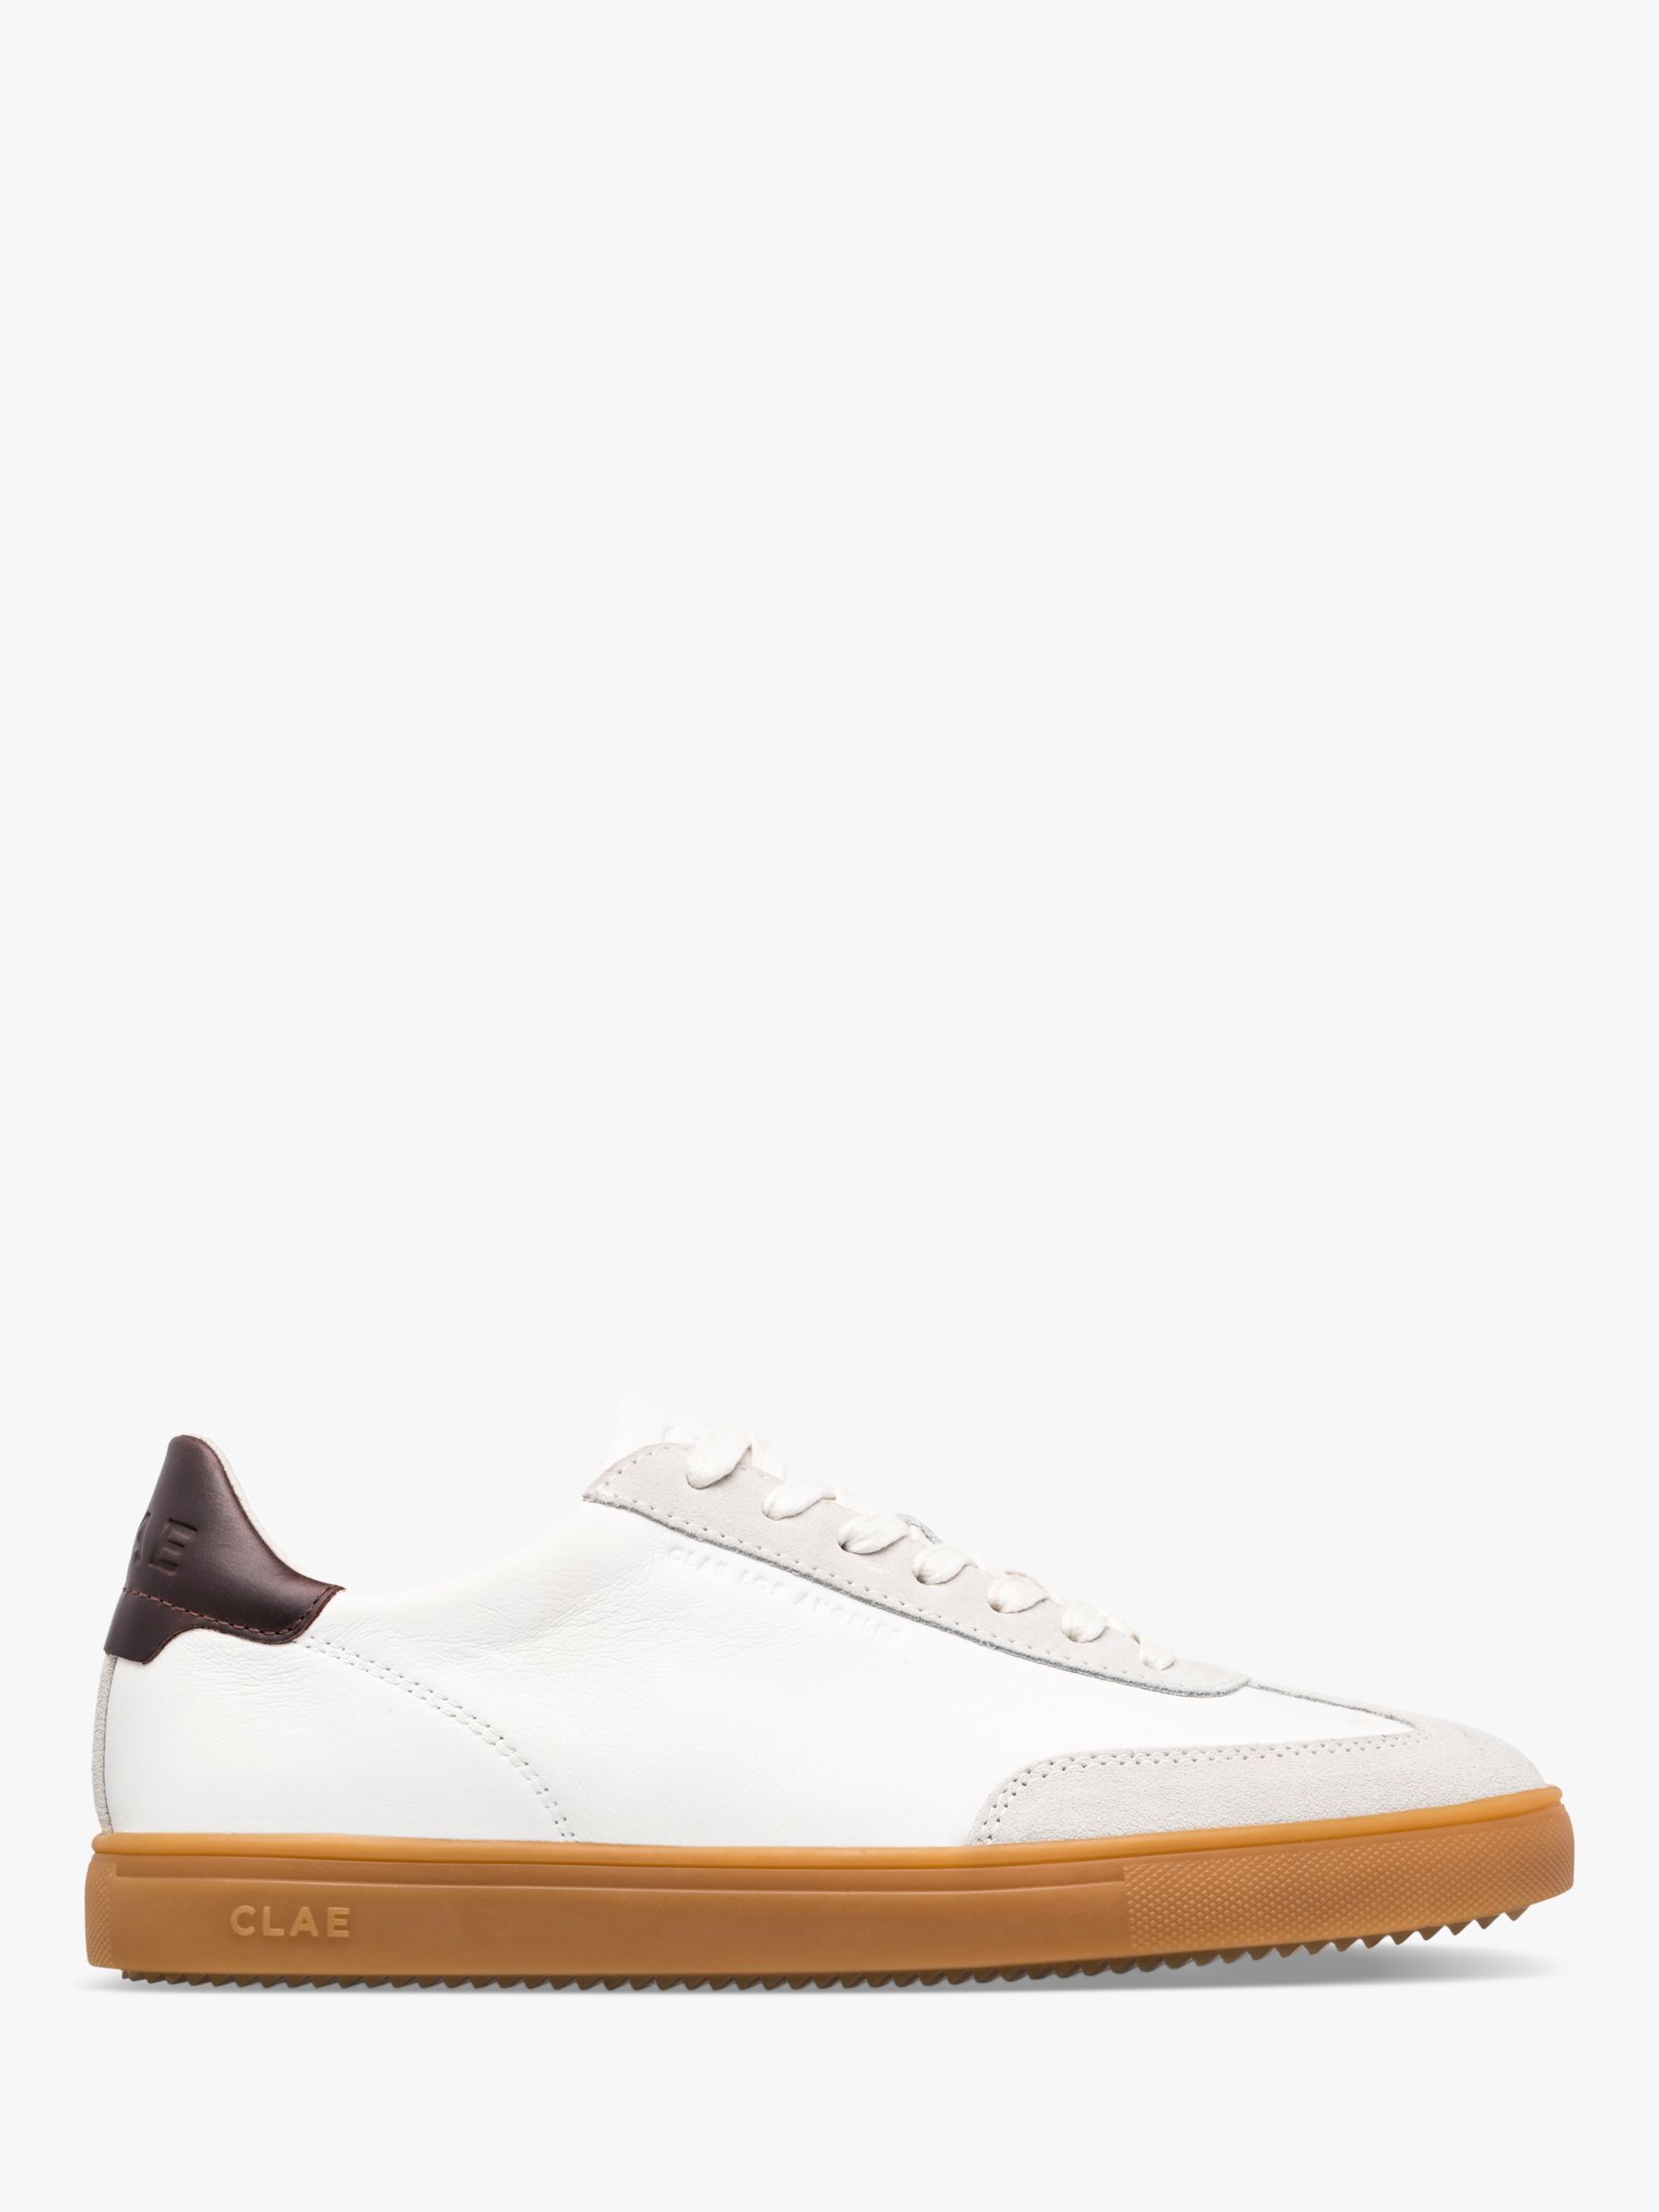 CLAE Deane Gum Leather Shoes, White at John Lewis & Partners